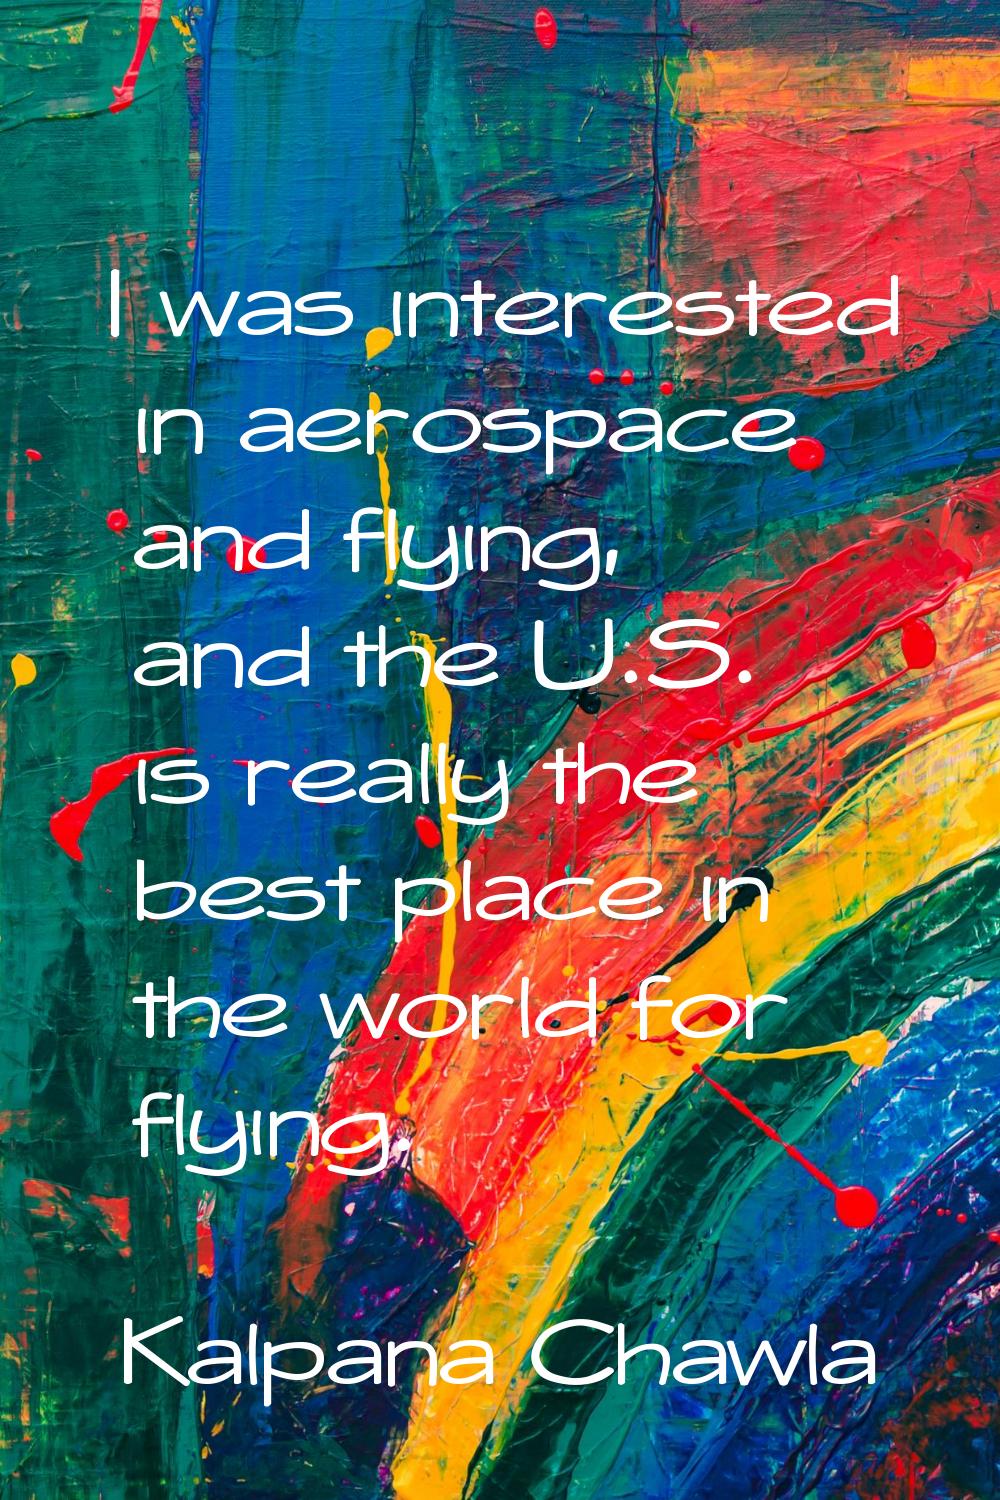 I was interested in aerospace and flying, and the U.S. is really the best place in the world for fl